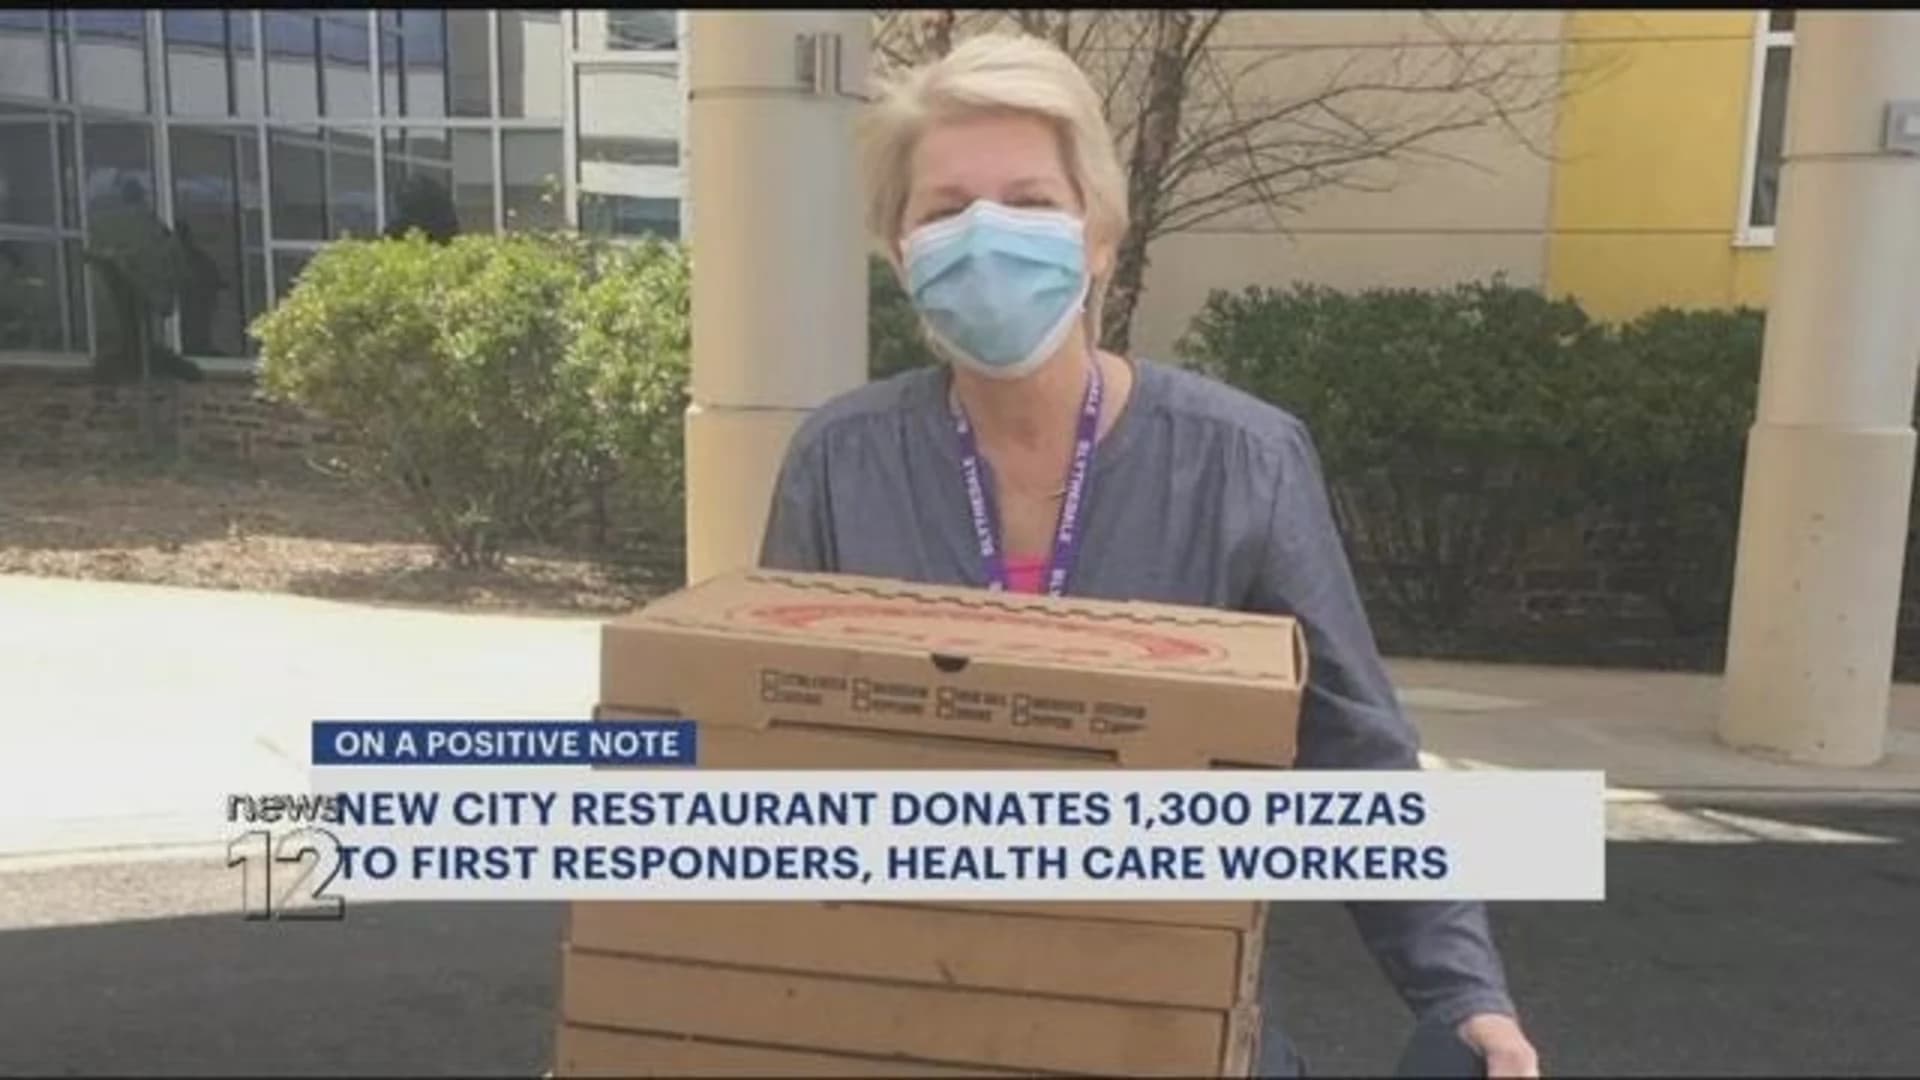 New City restaurant donates 1,300 pizzas to first responders, health care workers